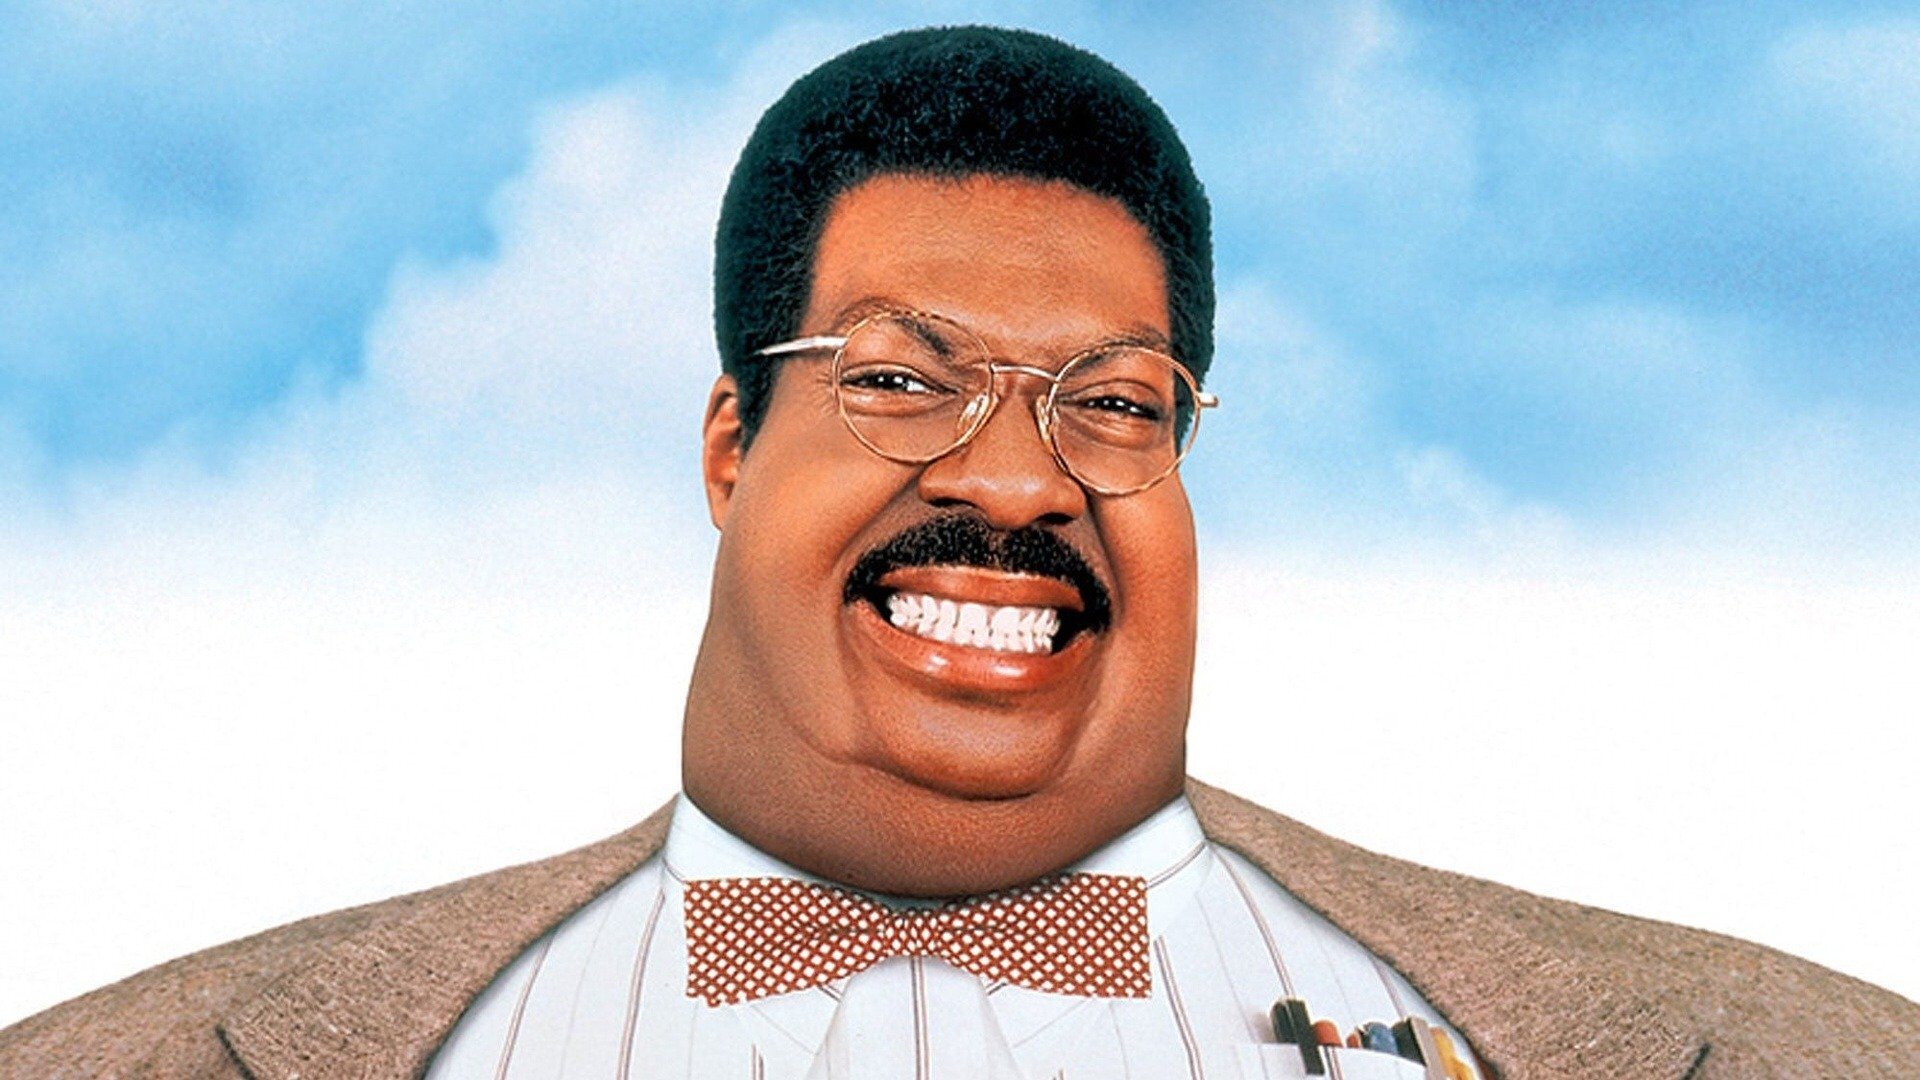 37-facts-about-the-movie-the-nutty-professor